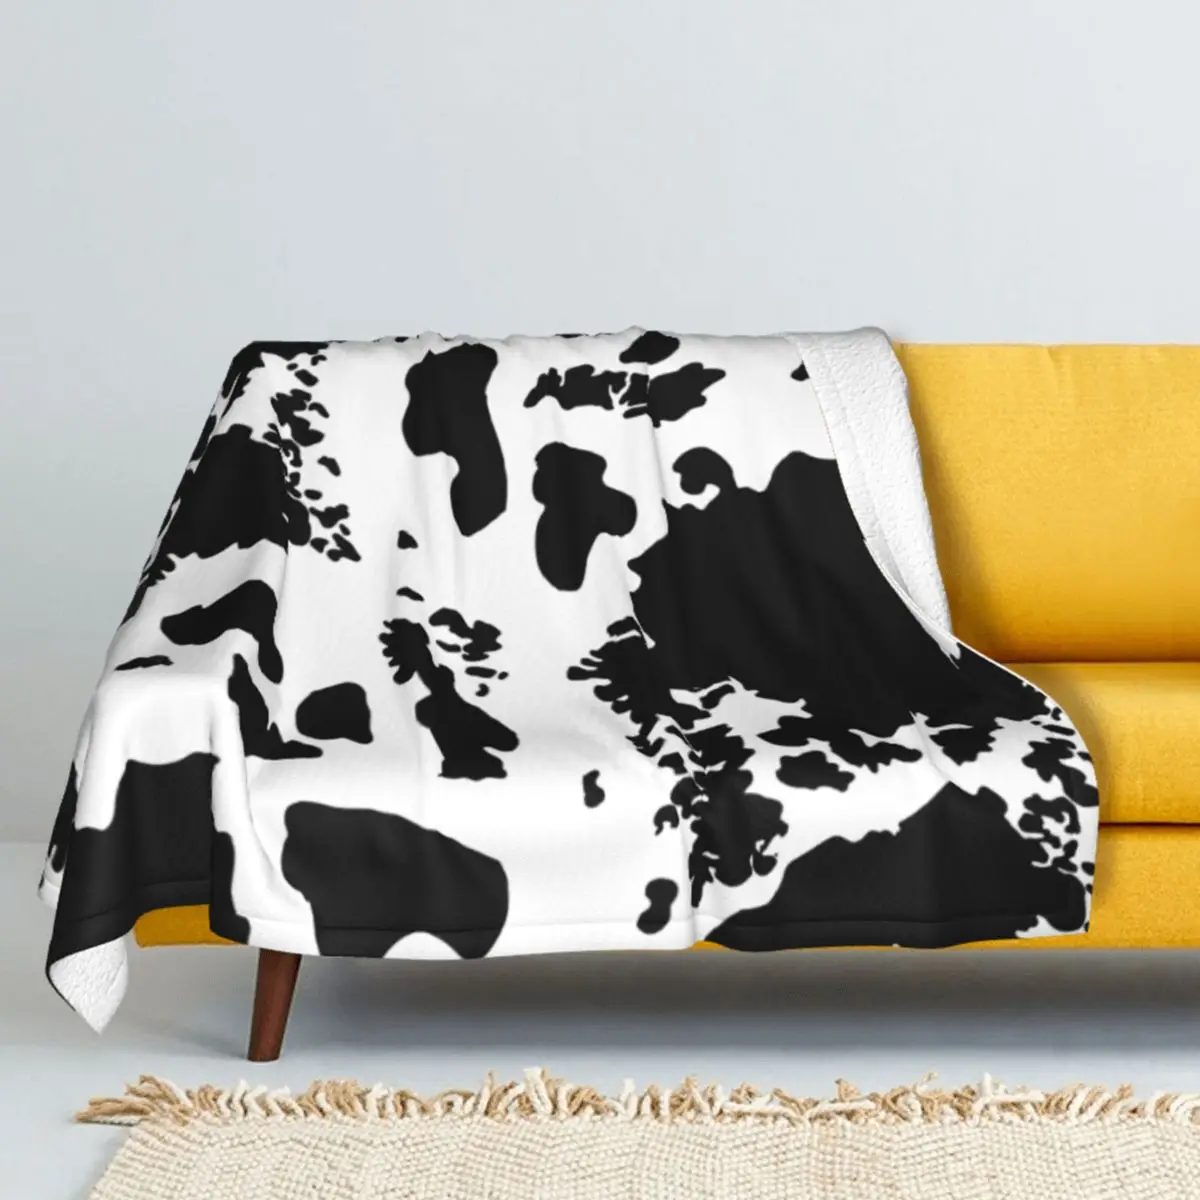 

Black White-Cowhide-Print-Patter Winter Thicken Cashmere blankets Lamb Blanket Coral fleece Throw blanket warmth bedclothes Sofa